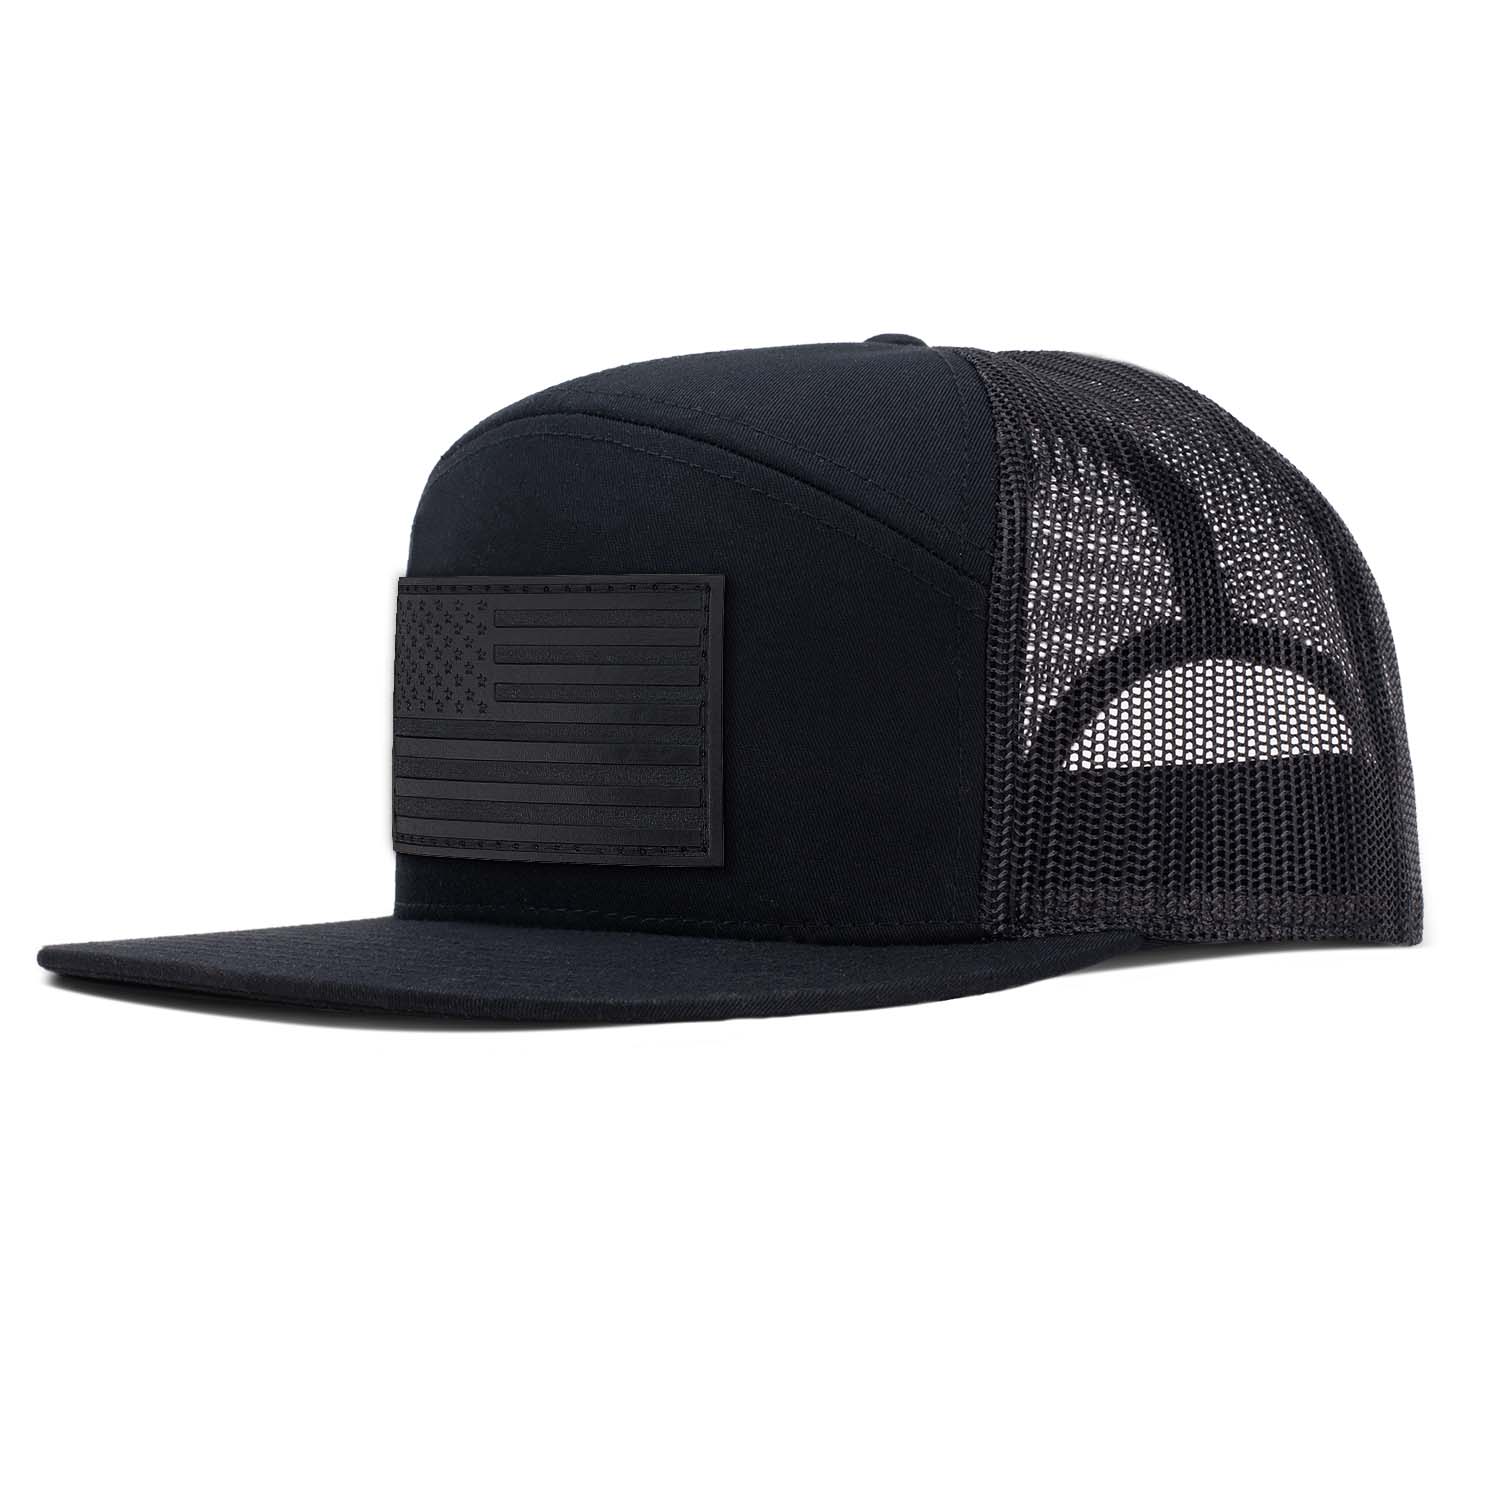 Blackout American Flag Leather Patch on All Black 7 Panel Trucker Hat